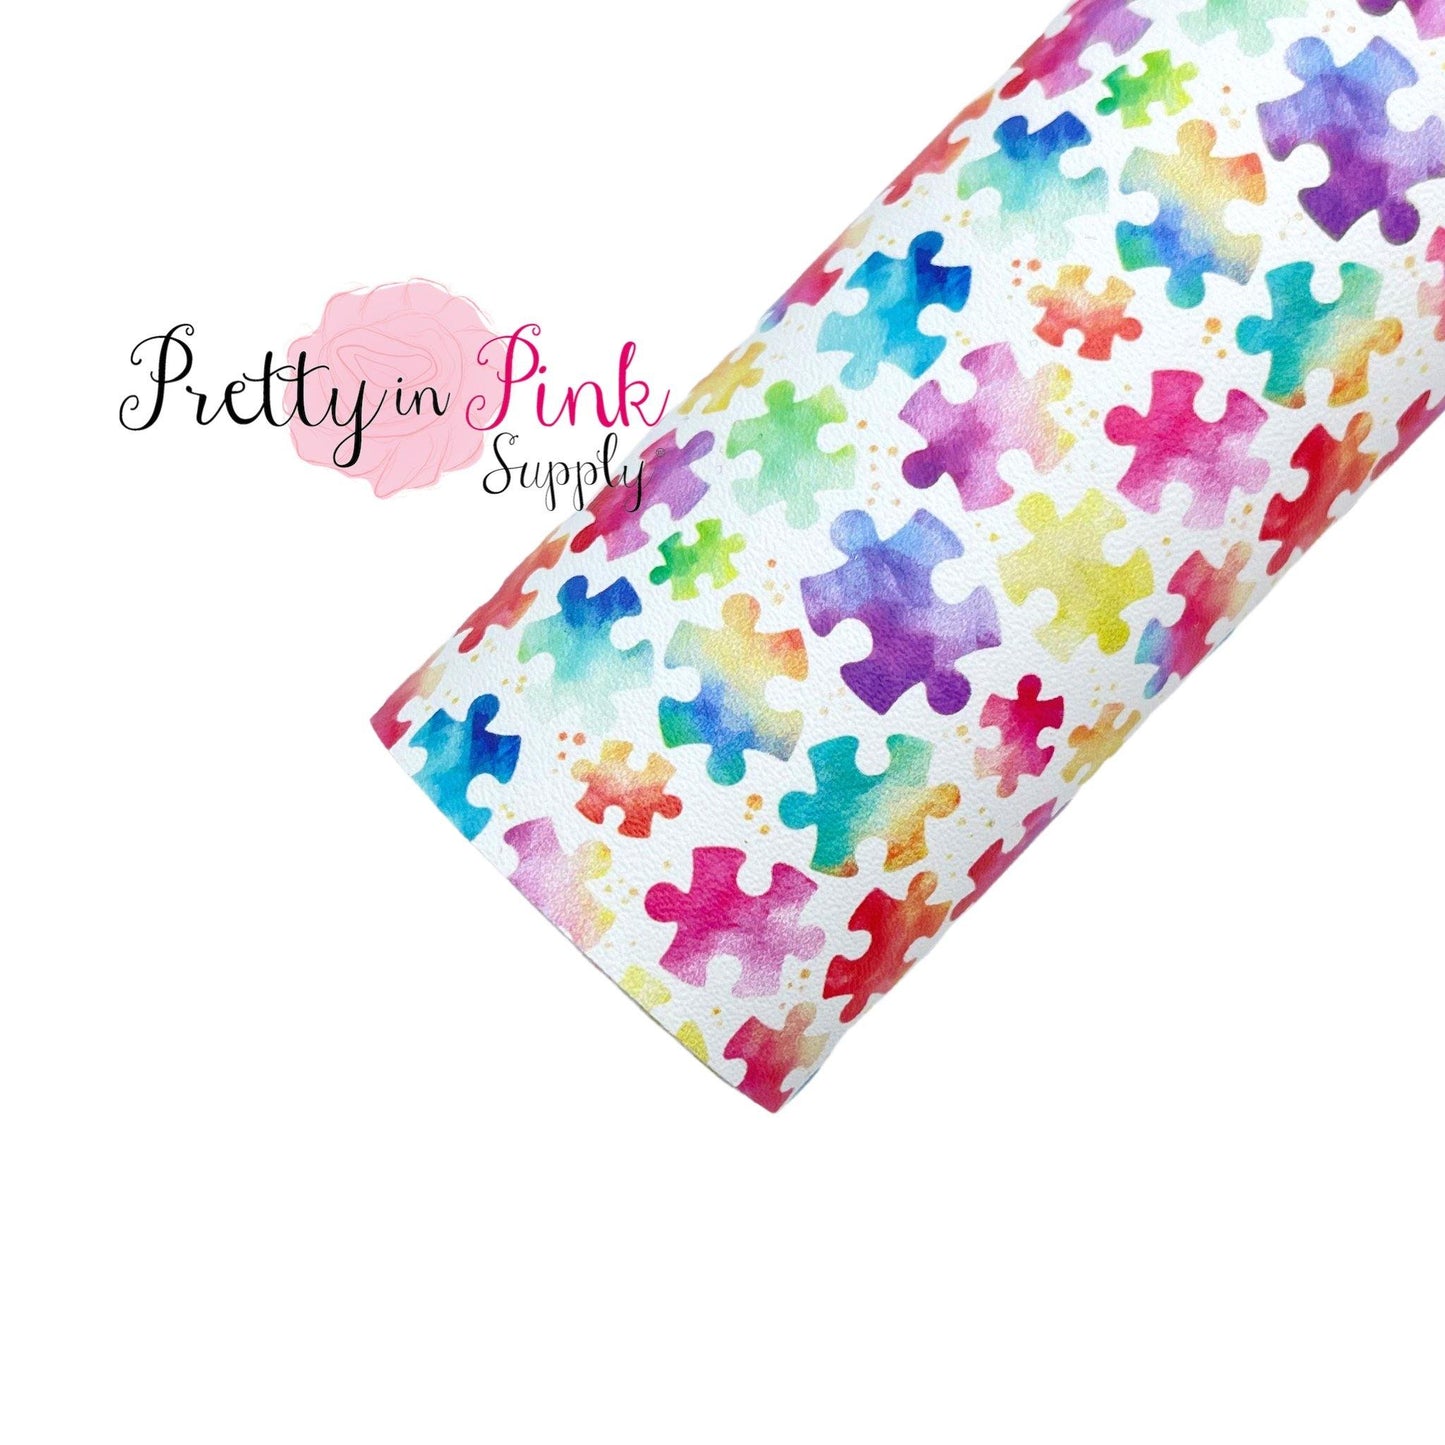 Colorful Puzzle Pieces | Faux Leather Fabric Sheet - Pretty in Pink Supply